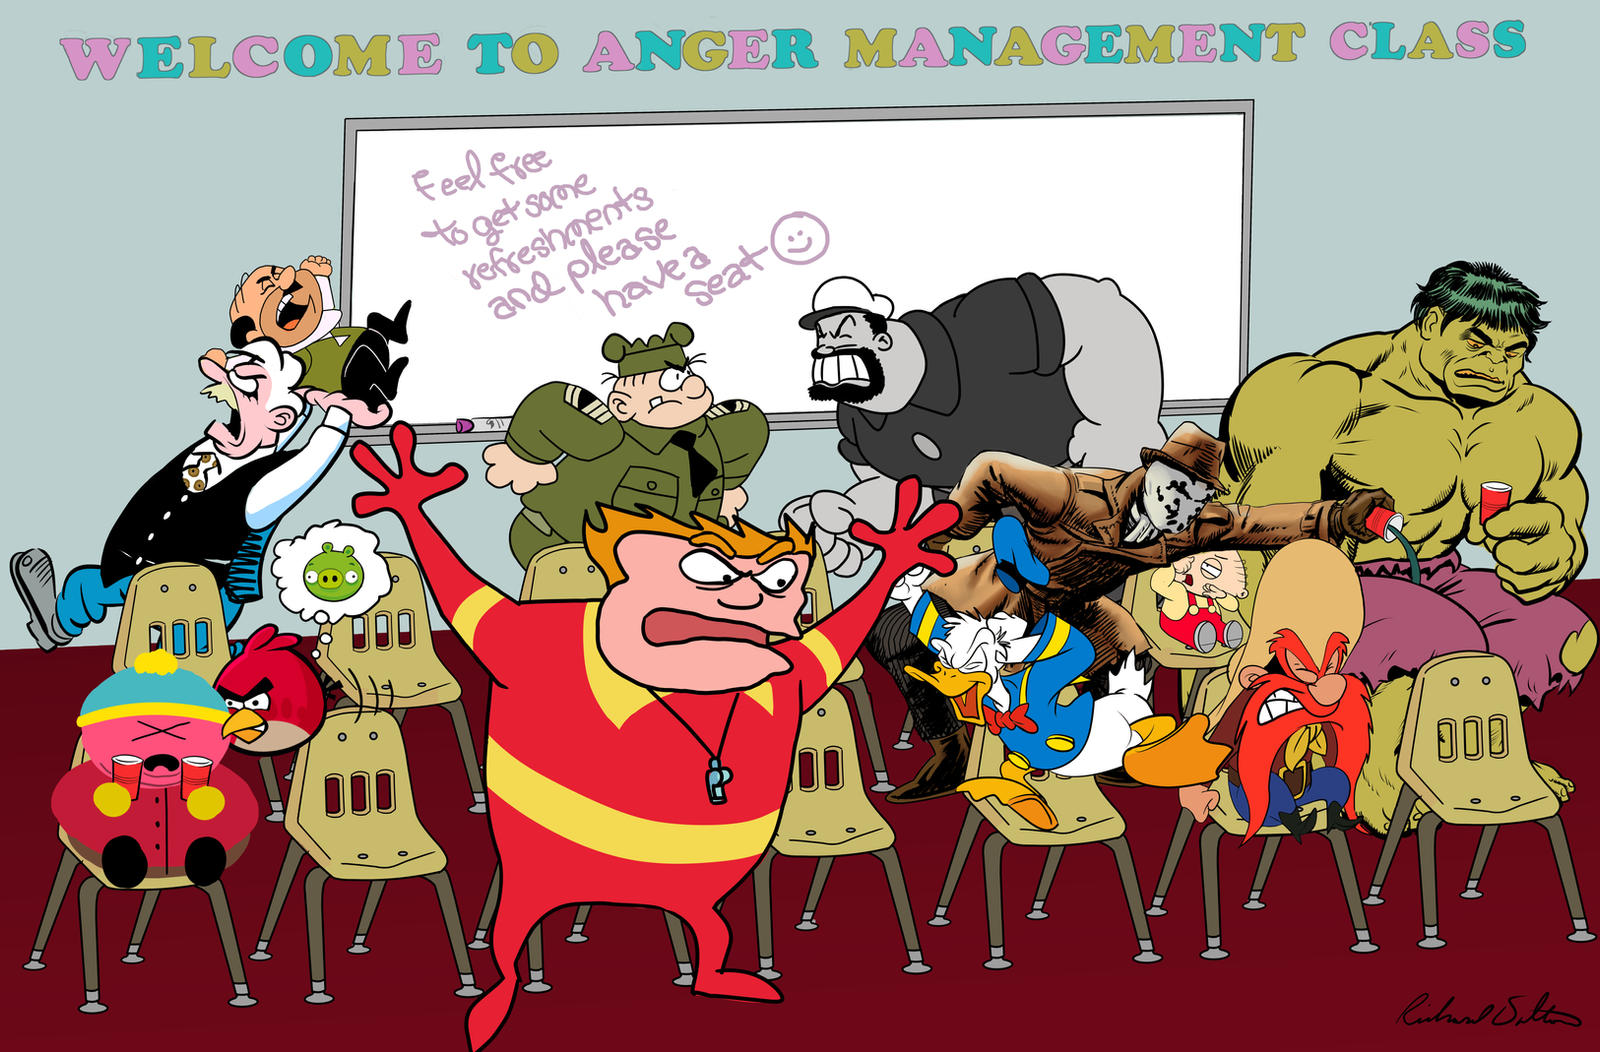 Anger Management Class by R-800 on DeviantArt